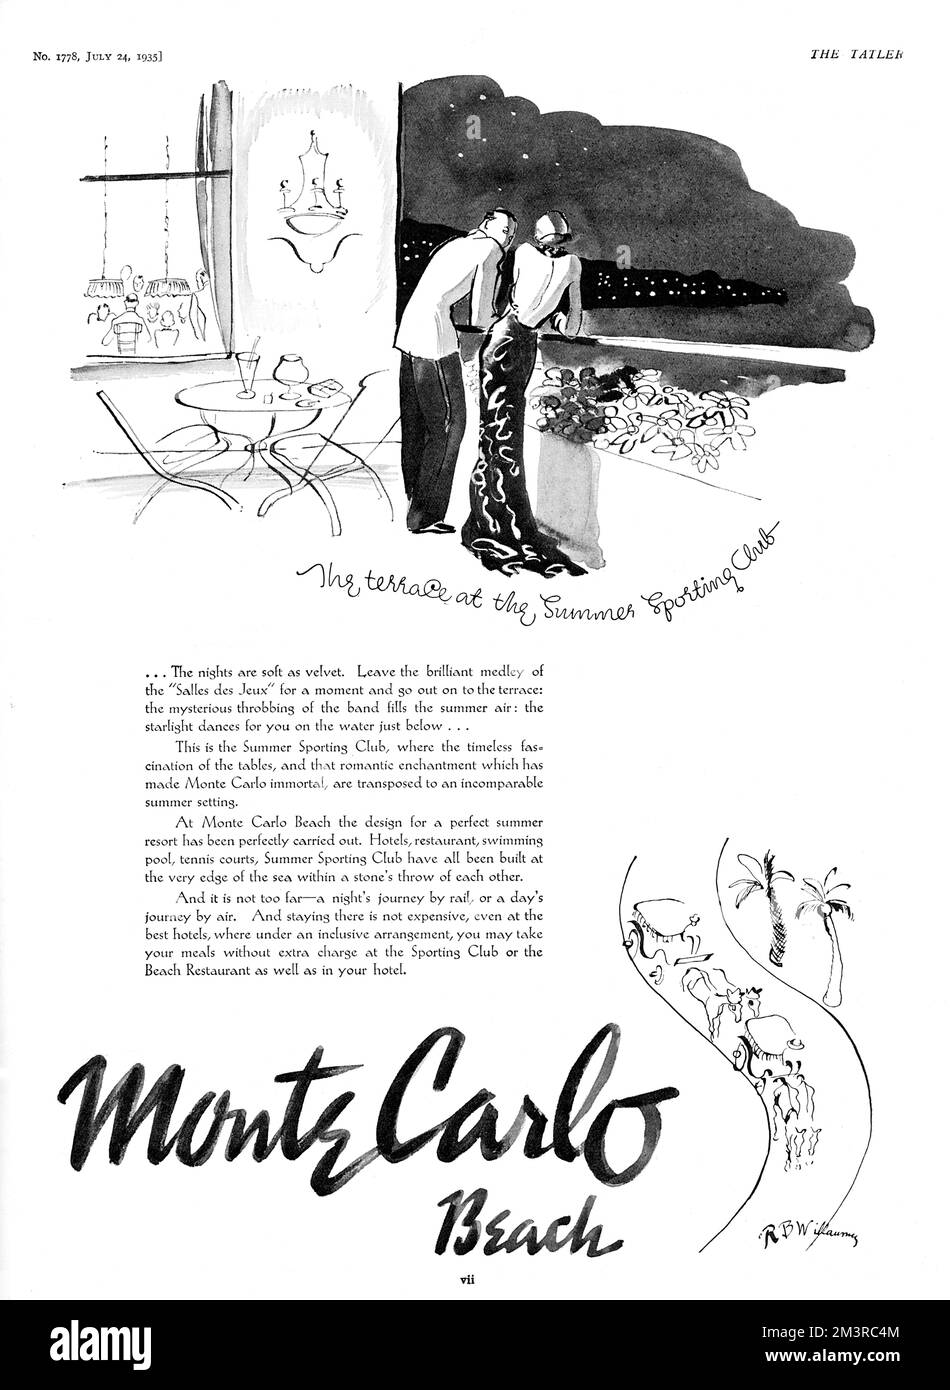 Advertisement for Monte Carlo on the French Riviera featuring an illustration and alluring description of the Summer Sporting Club.  A couple leave the 'Salles des Jeux' for a moment to enjoy the night 'as soft as velvet' on the club's balcony.      Date: 1935 Stock Photo